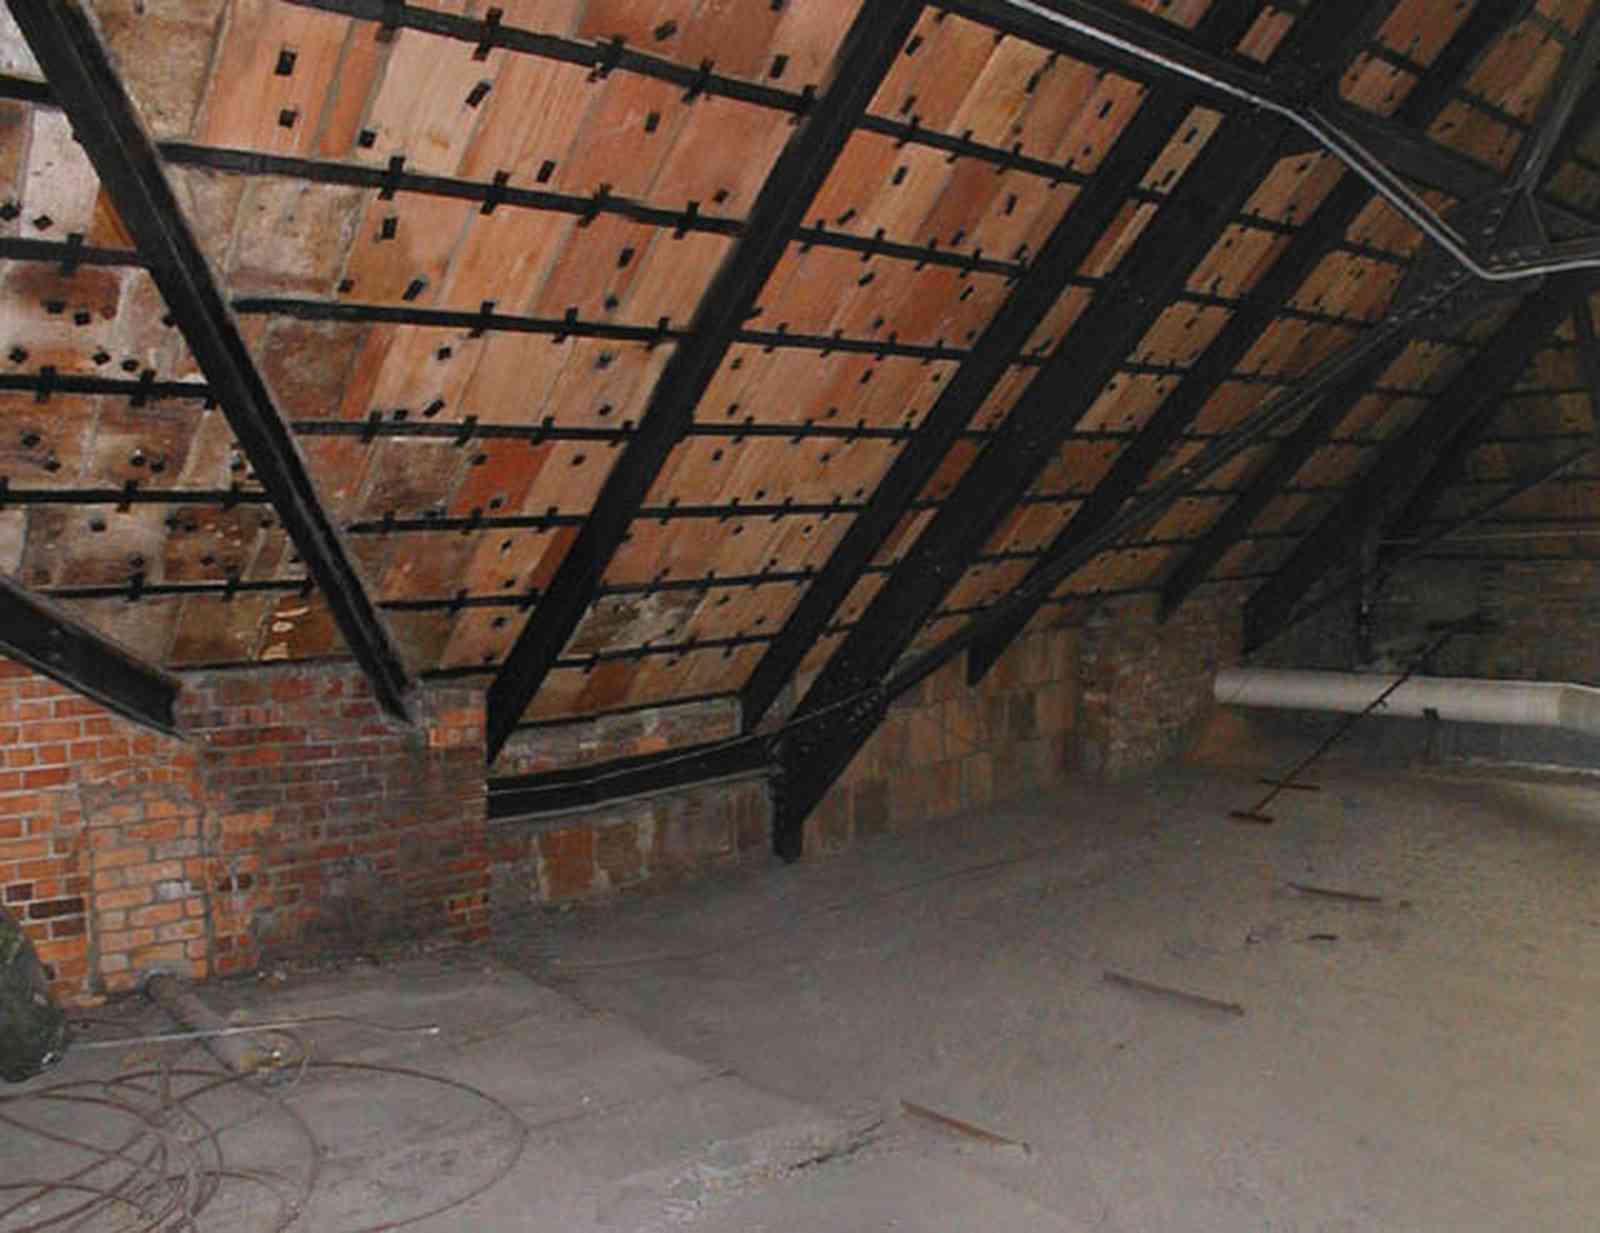 Pensacola:-Palafox-Historic-District:-Escambia-County-Courthouse_10.jpg:  attic, roof tiles, metal spring tension braces, brick walls